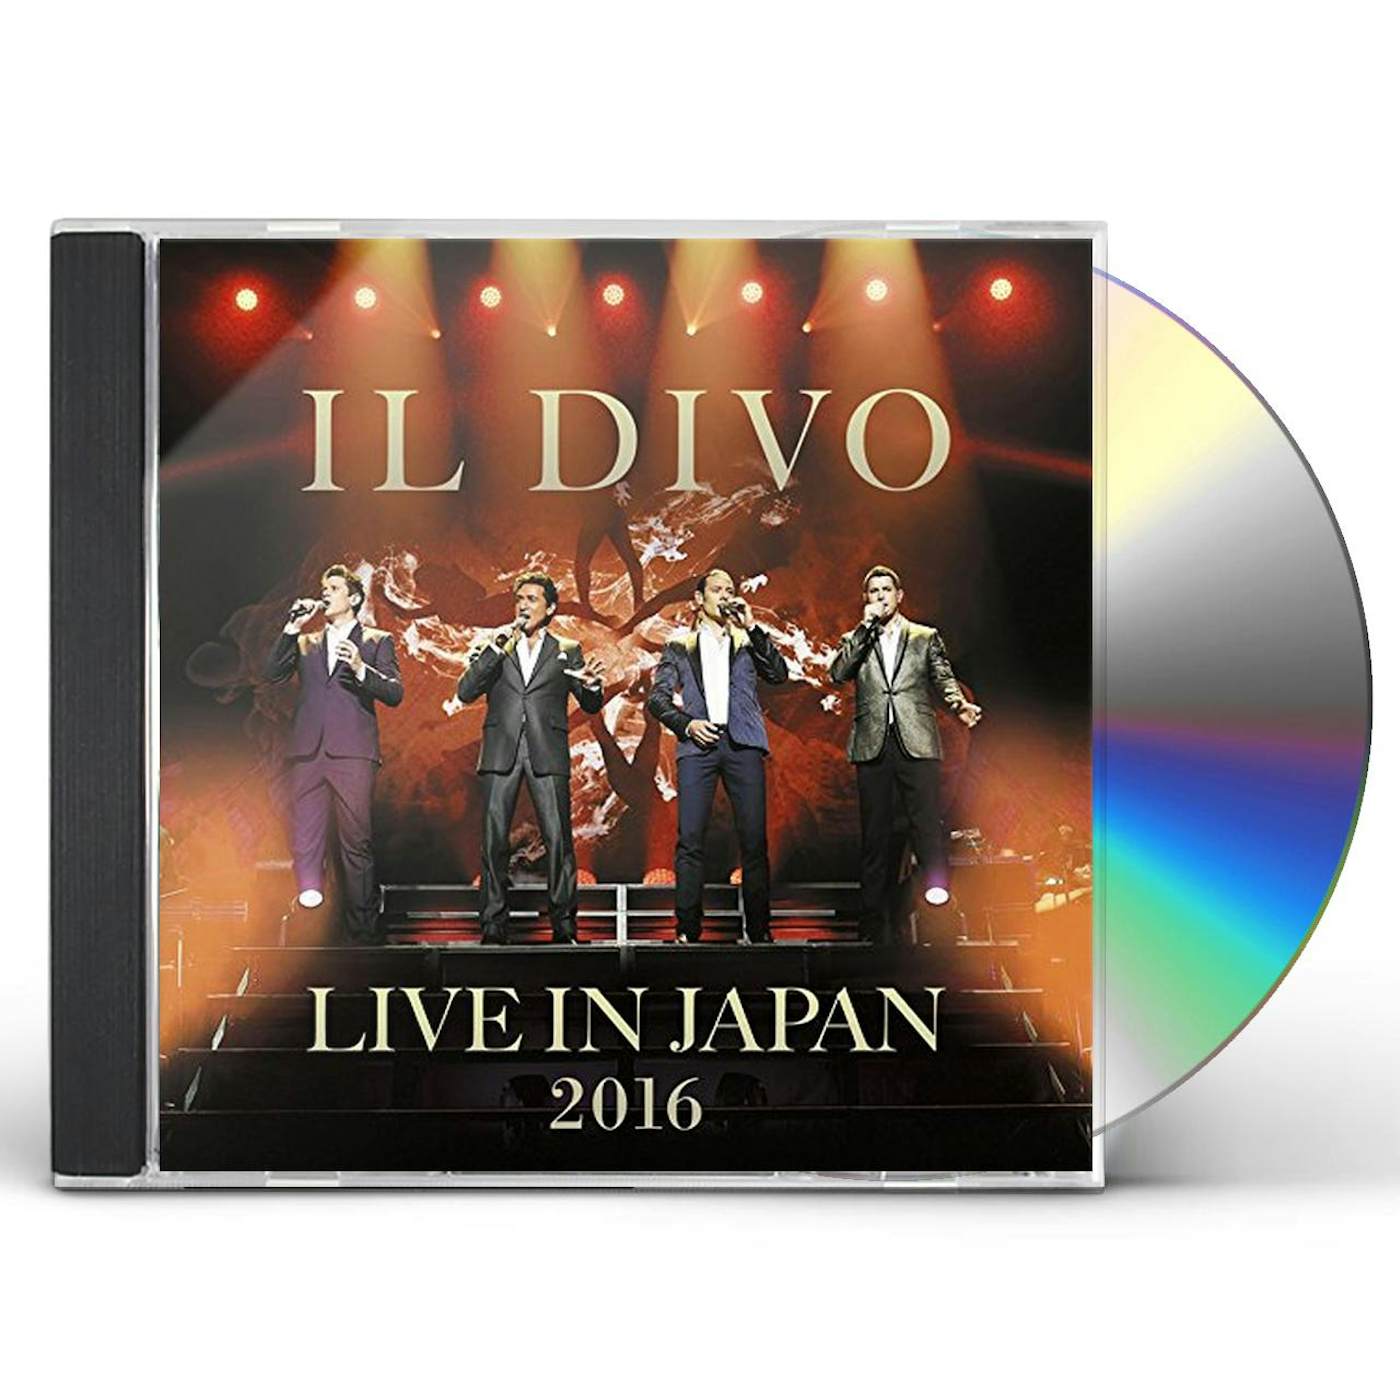 Il Divo LIVE IN JAPAN 2016: SPECIAL EDITION CD